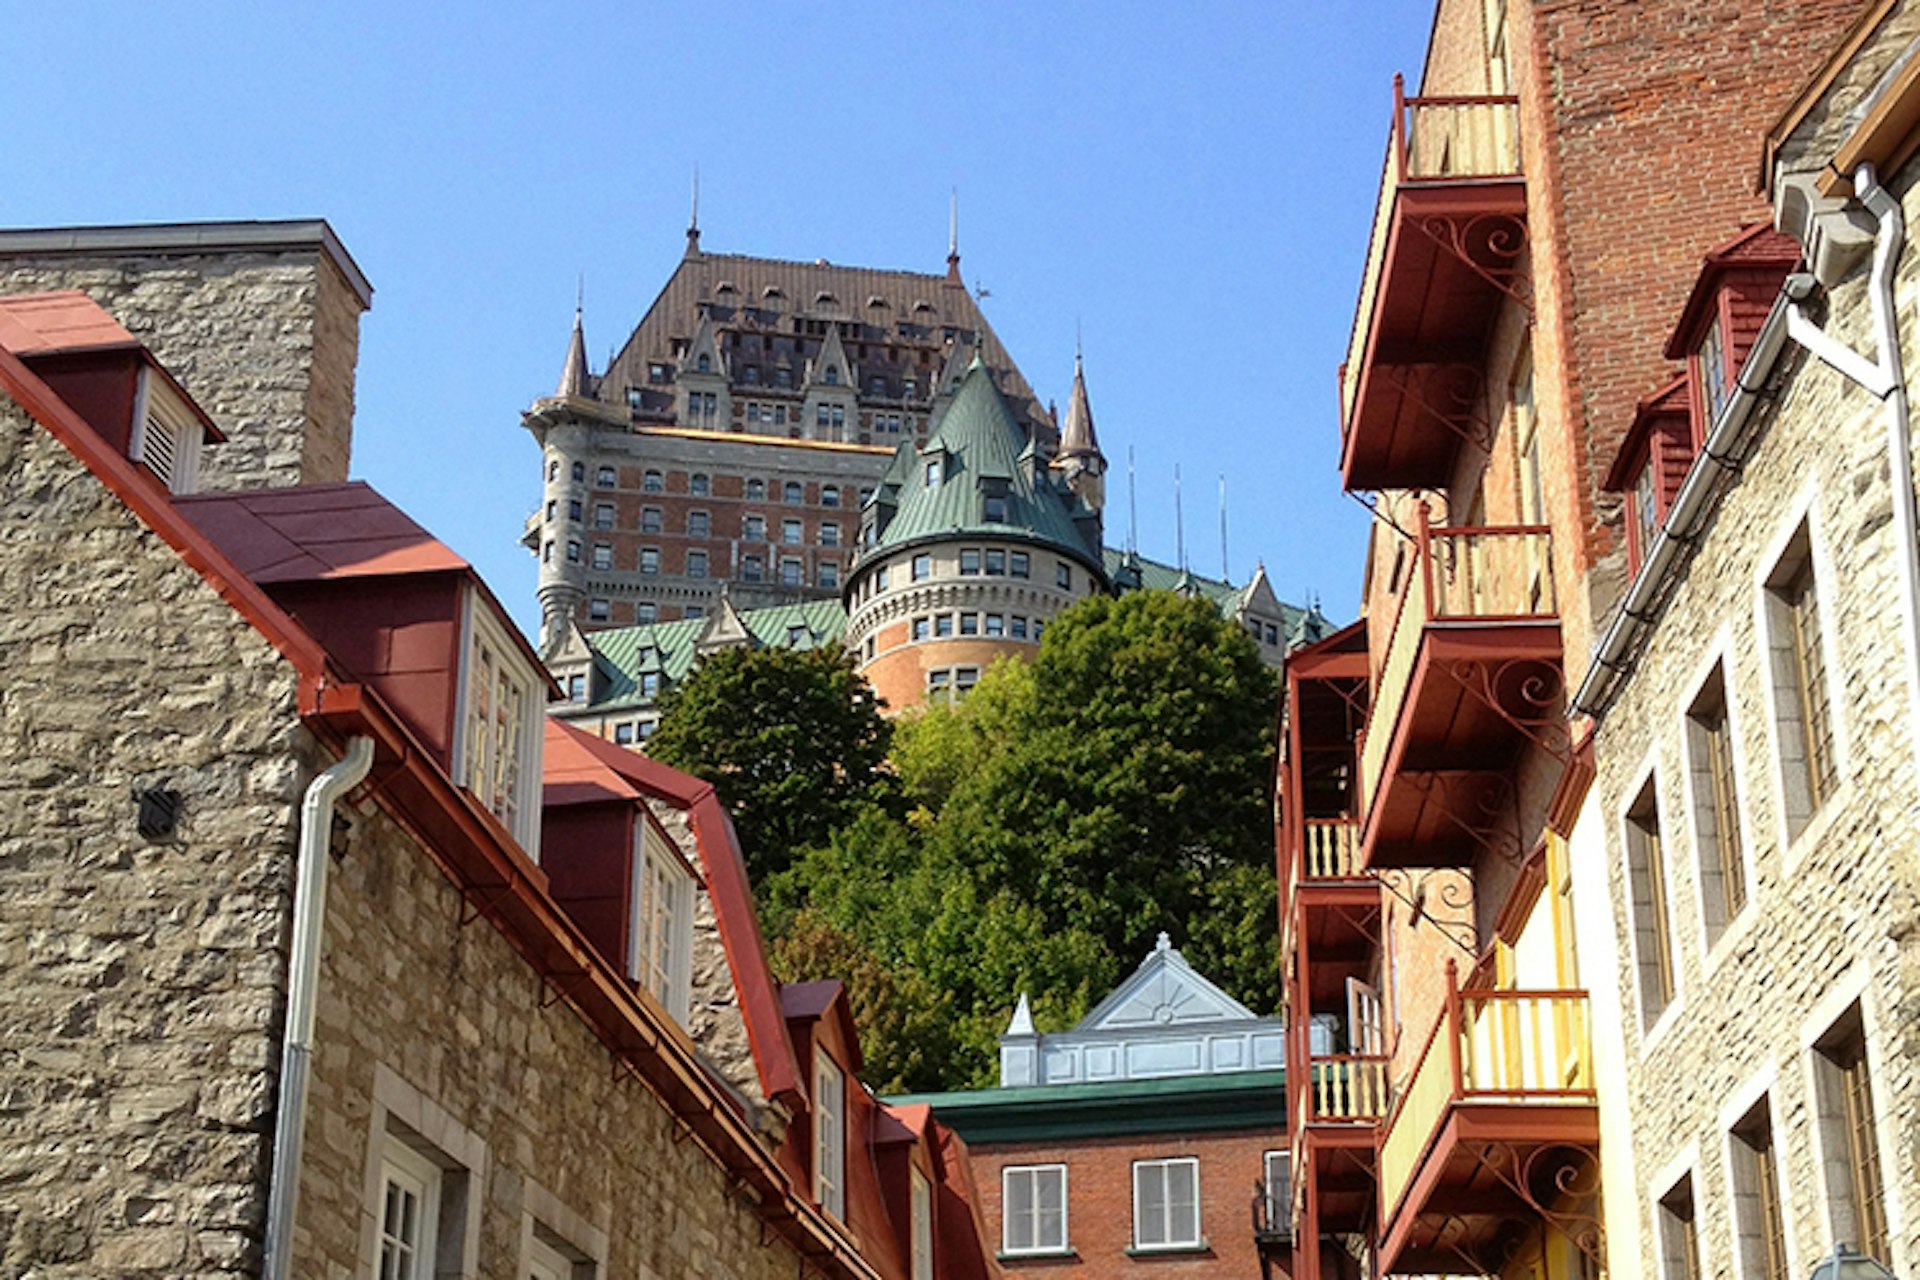 View of Le Château Frontenac from the Old Lower Town. Image by Tim Richards / Lonely Planet